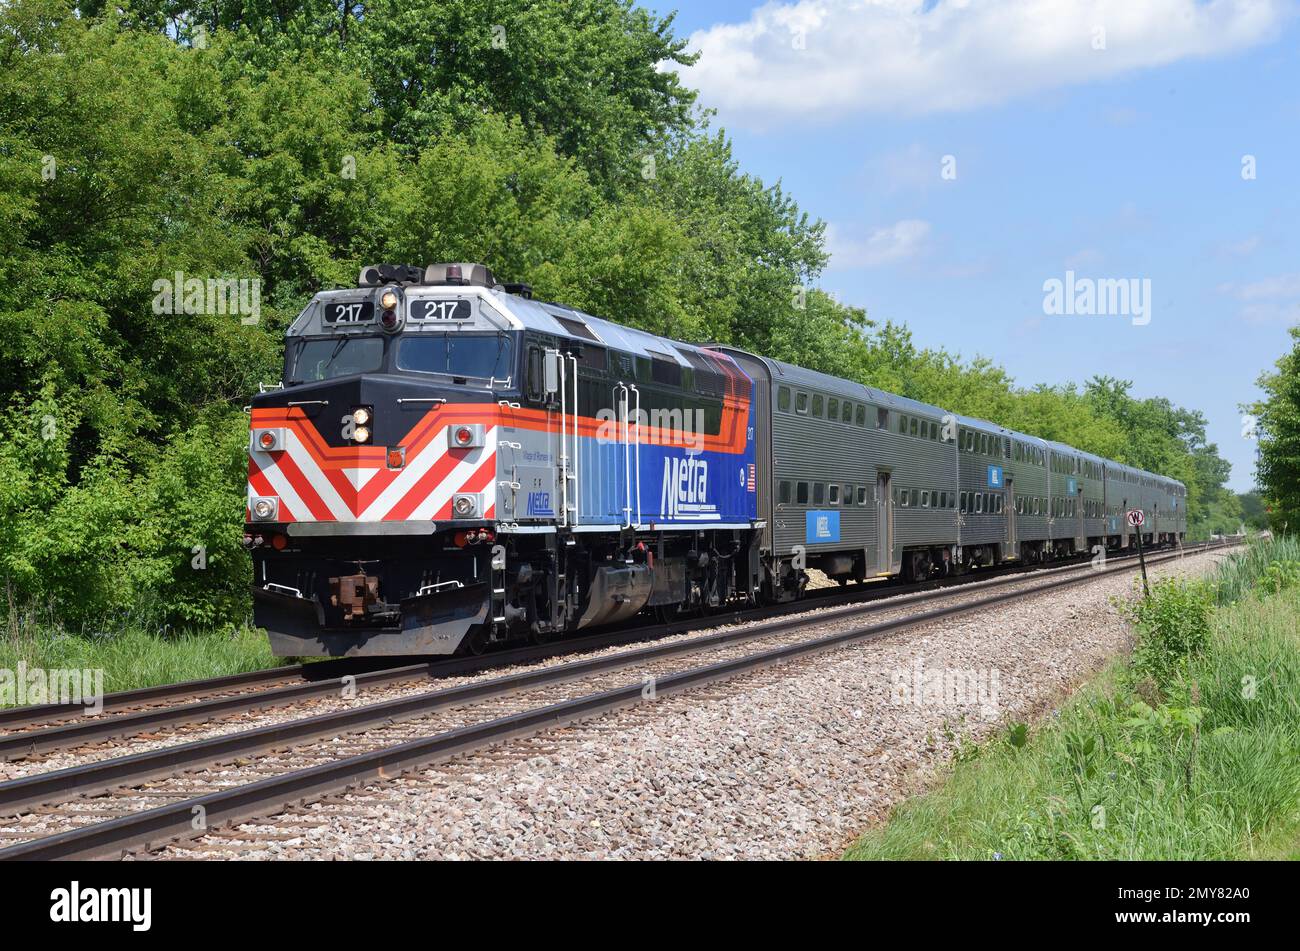 Bartlett, Illinois, USA. A Metra commuter train just prior to its arrival at the local commuter train staiton. Stock Photo